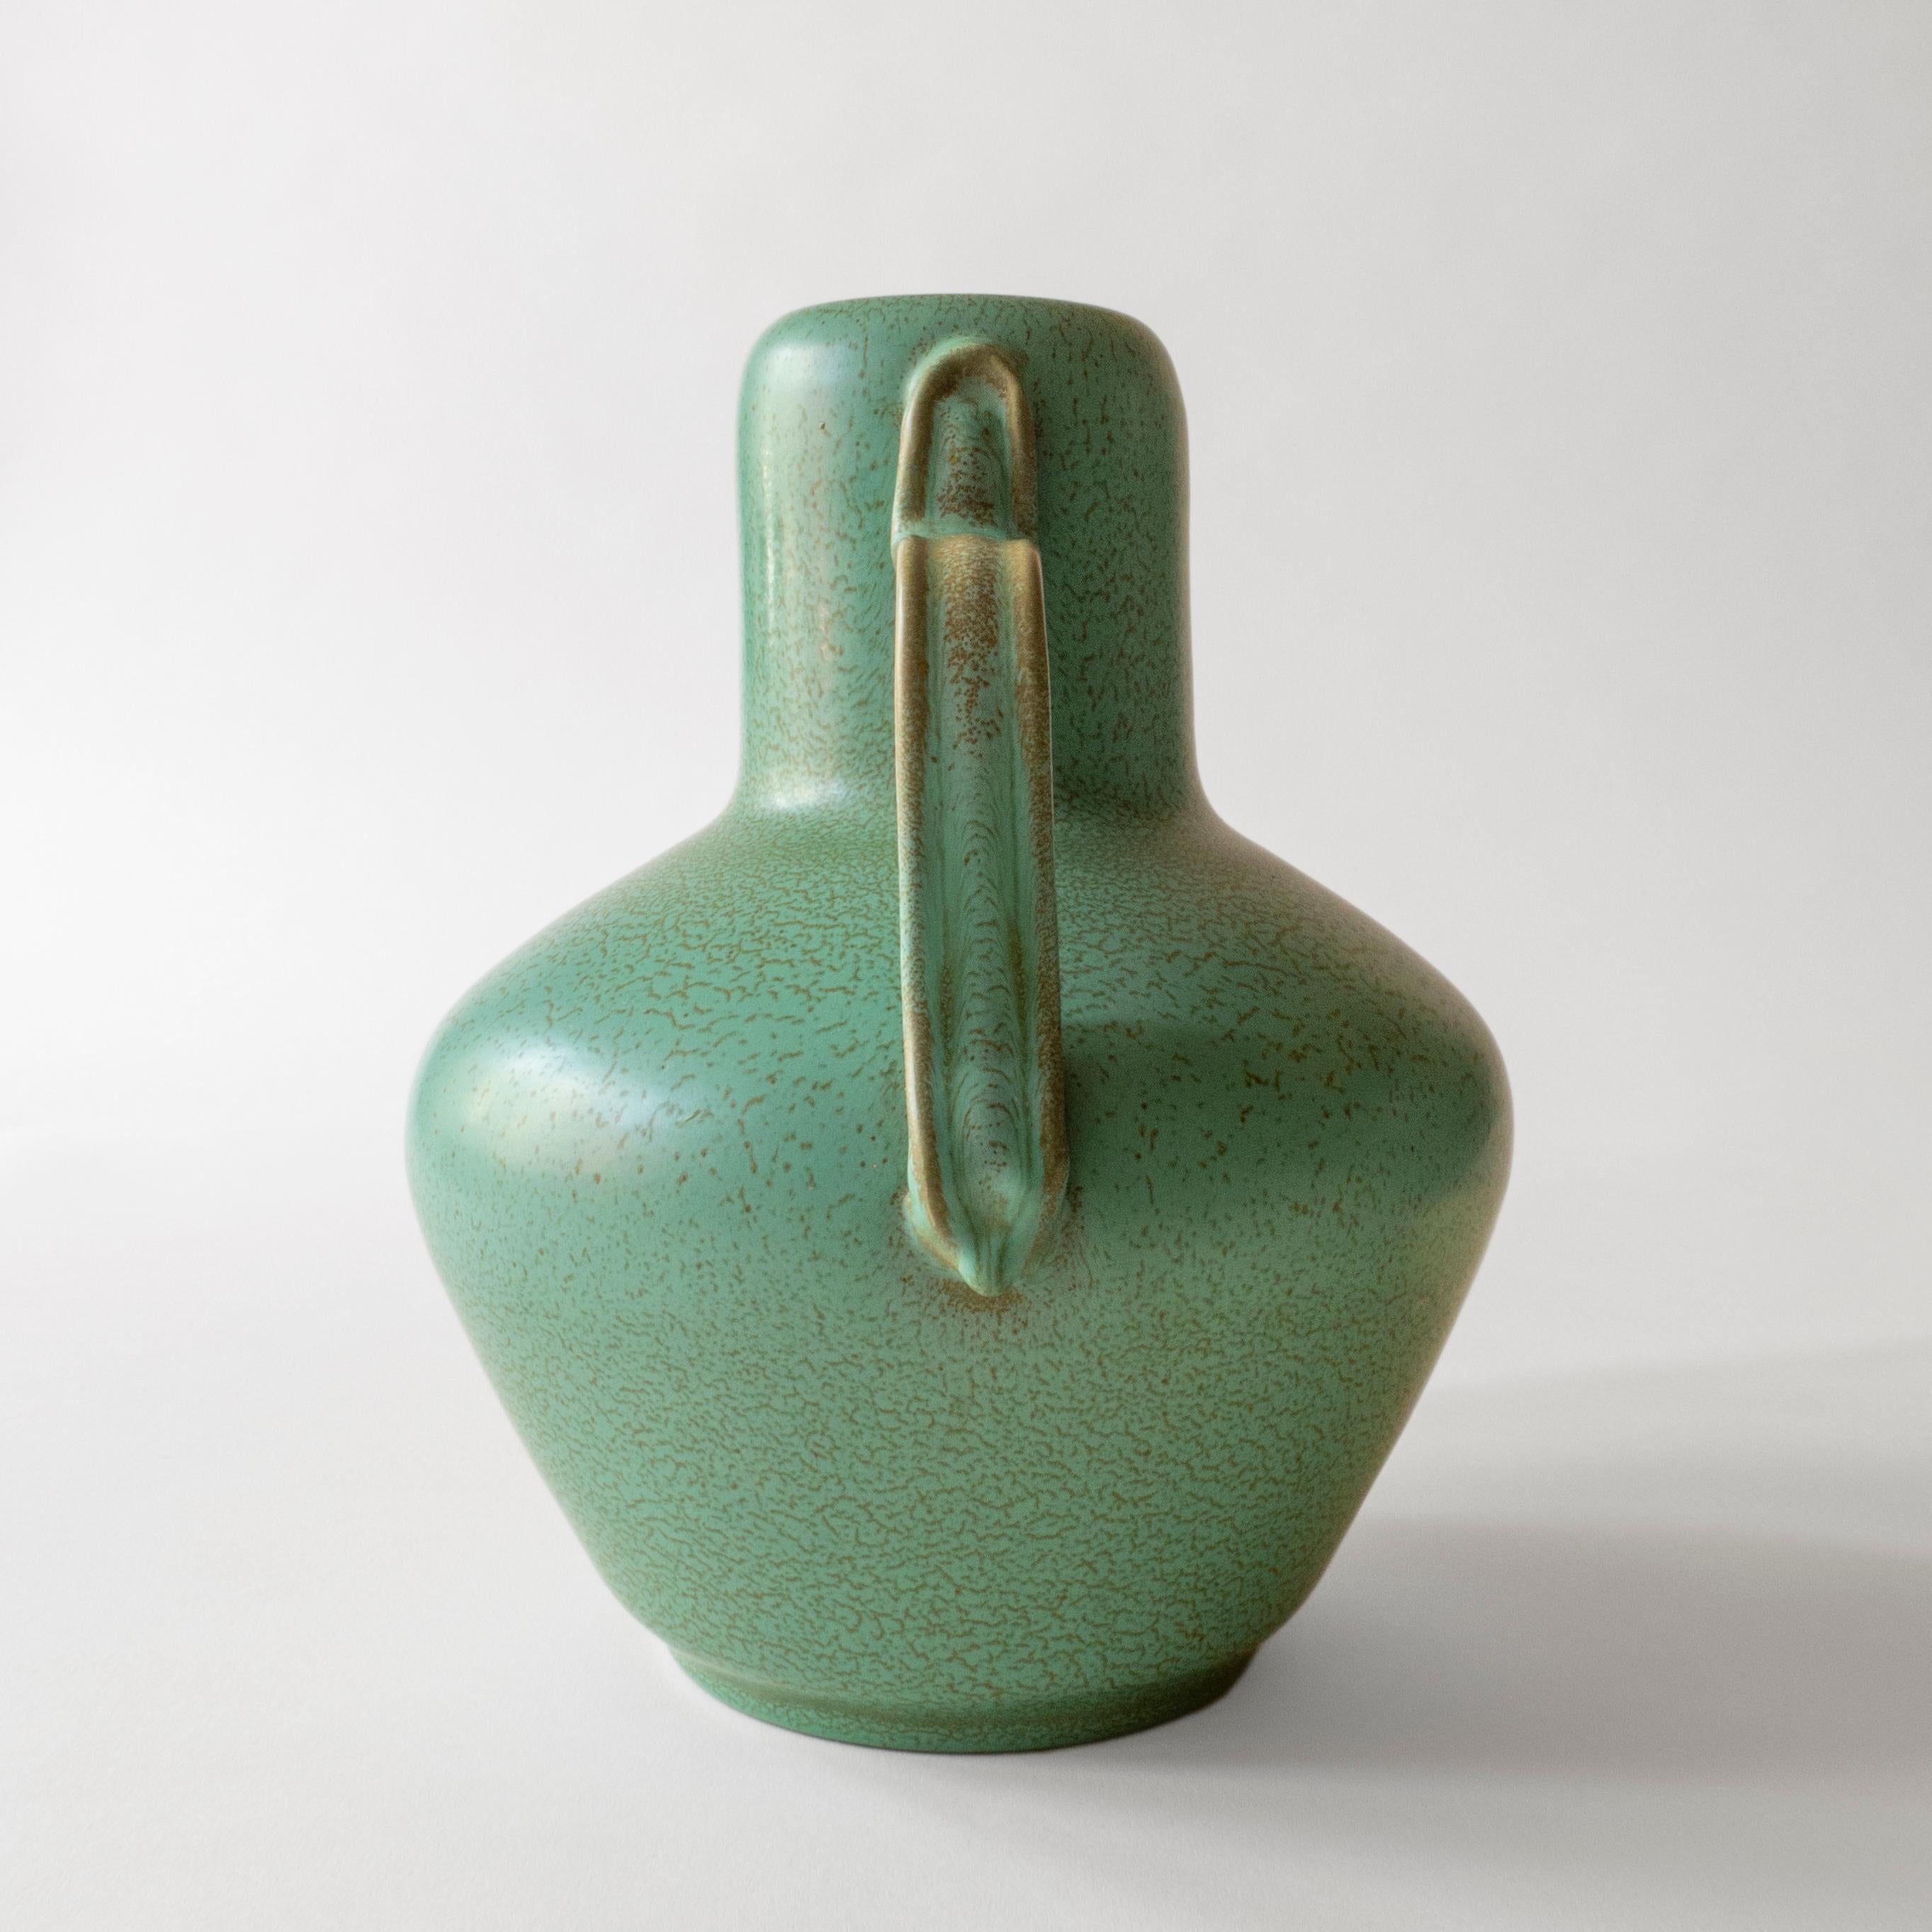 Each shaped handle, elegantly applied to the pared-down, modernist vase, speckled drip glaze in green and emerald hues throughout. Marked underneath: D183 SMARGAD (Emerald) Bo Fajans

Ewald Dahlskog (1894-1950) was an renowned Swedish artist of